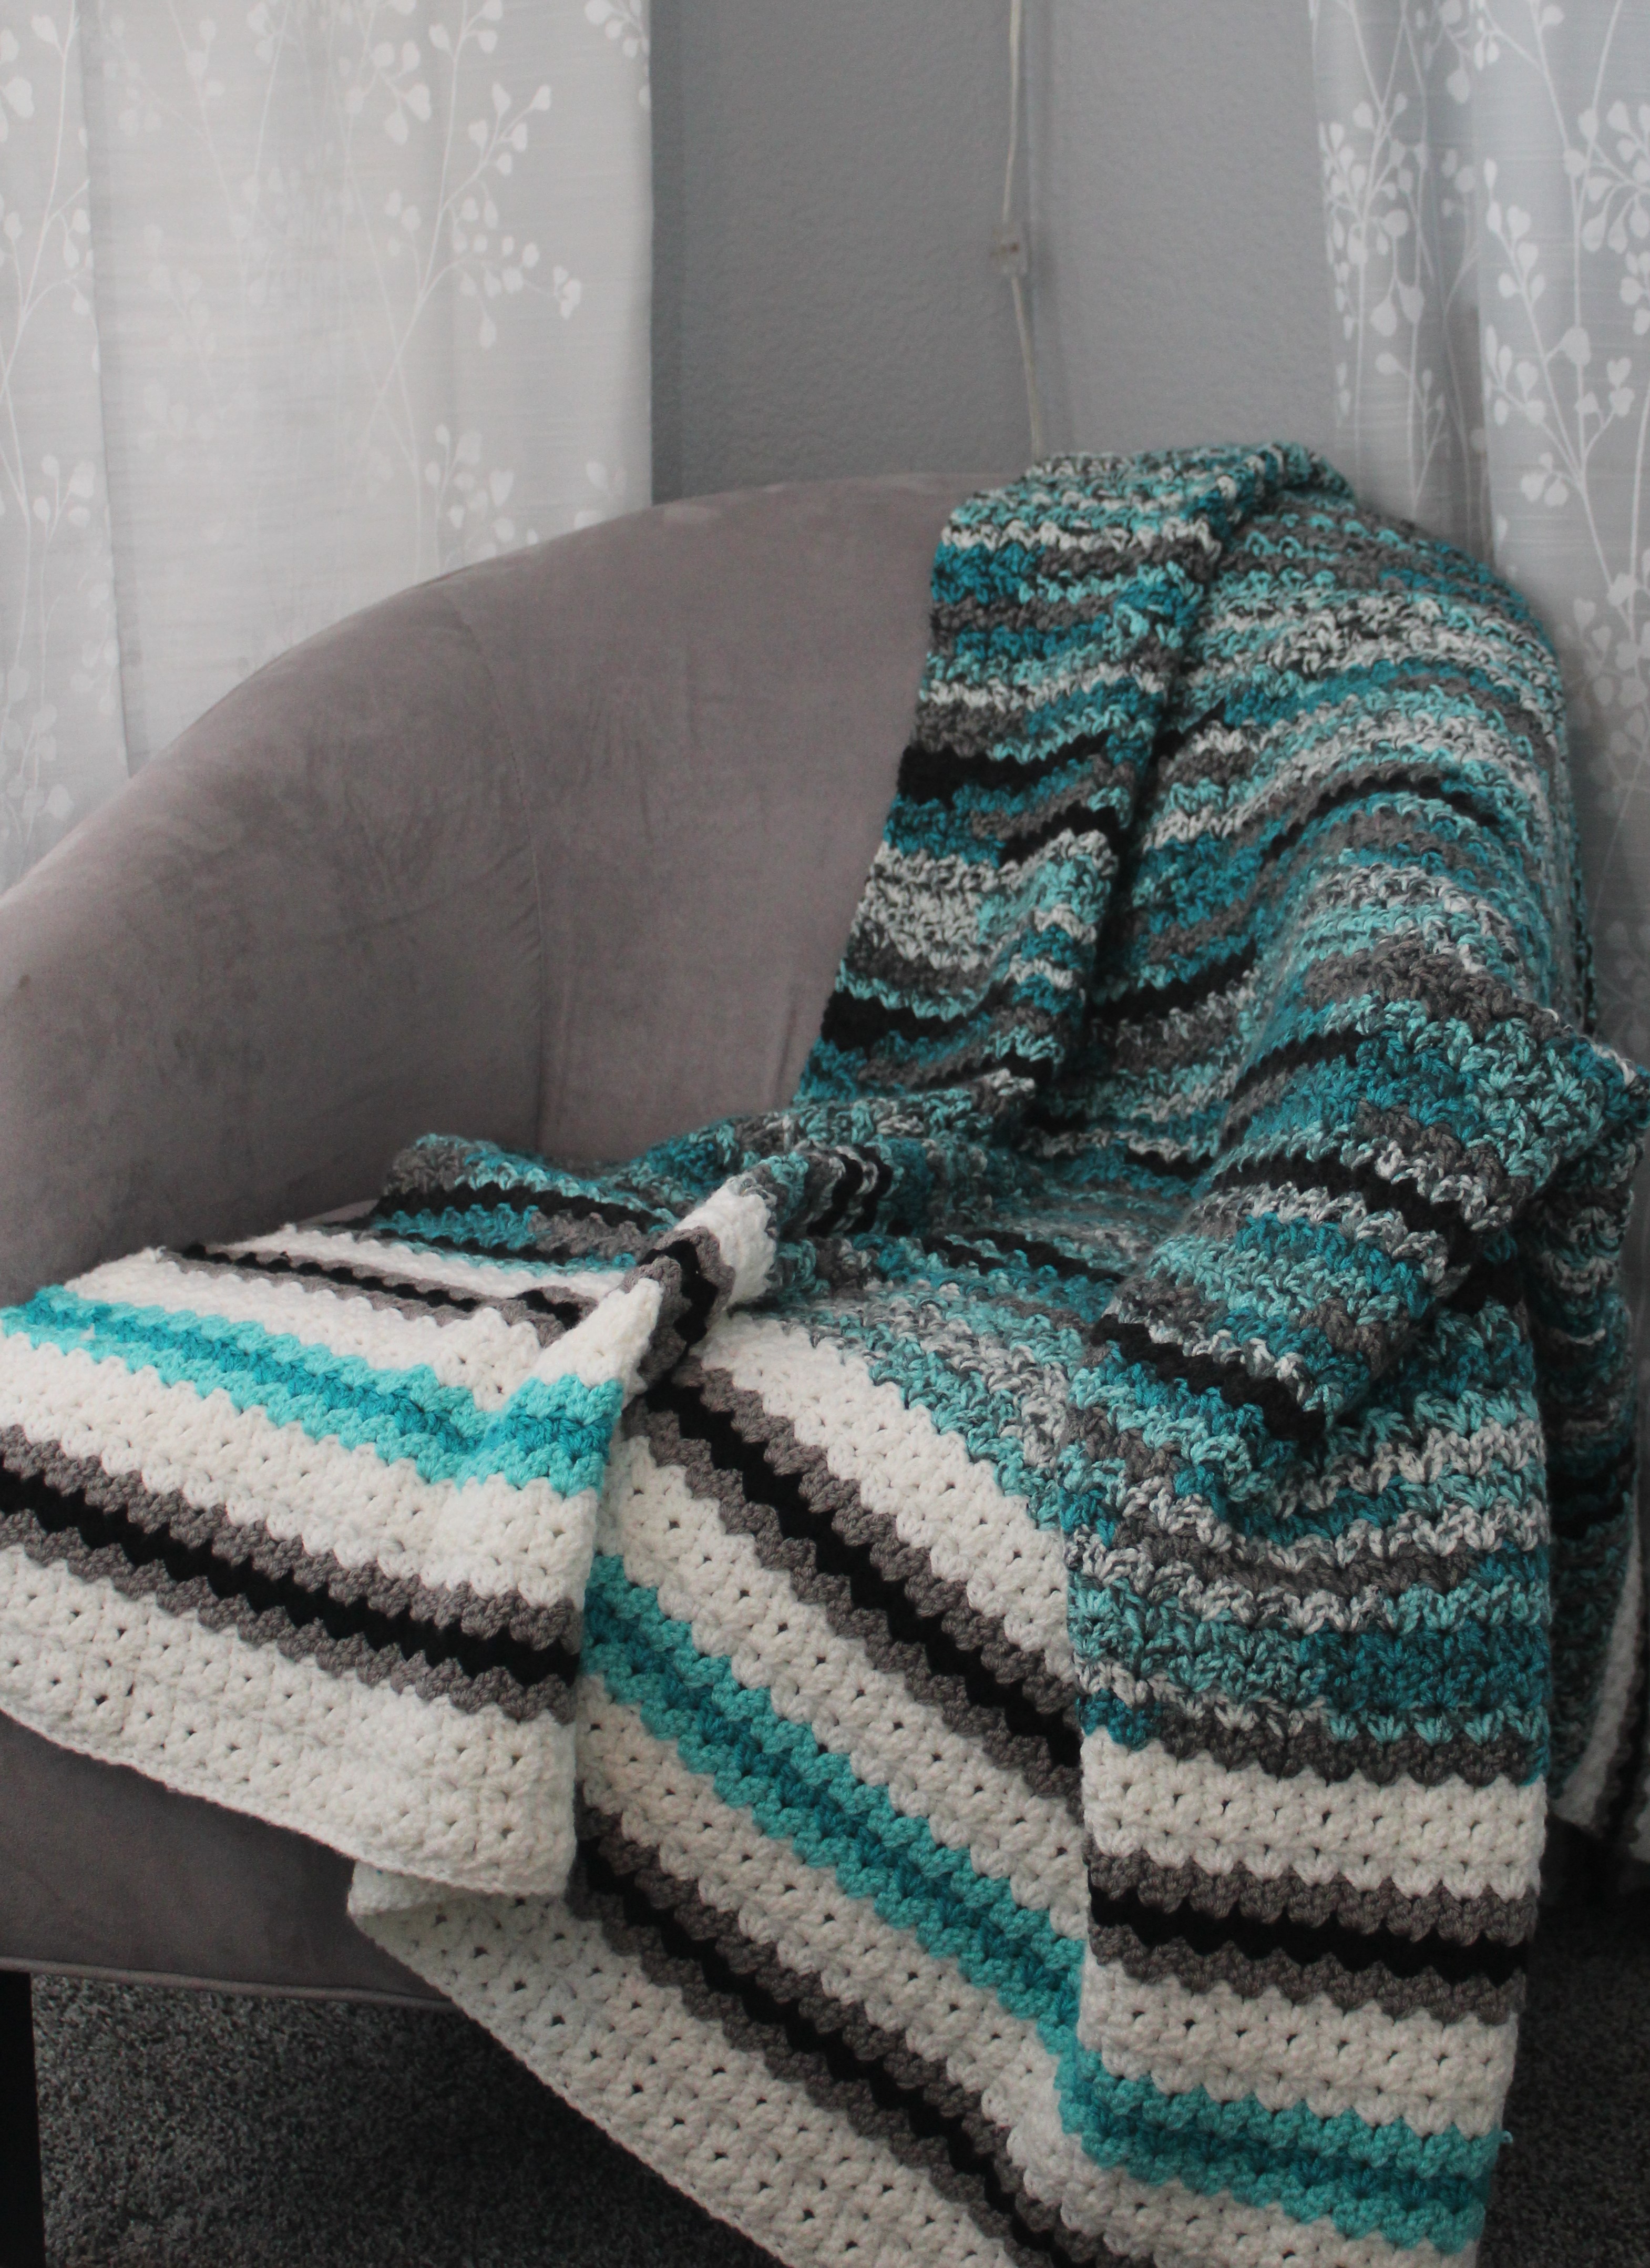 teal, black, grey, and white afghan draped over chair in corner next to window